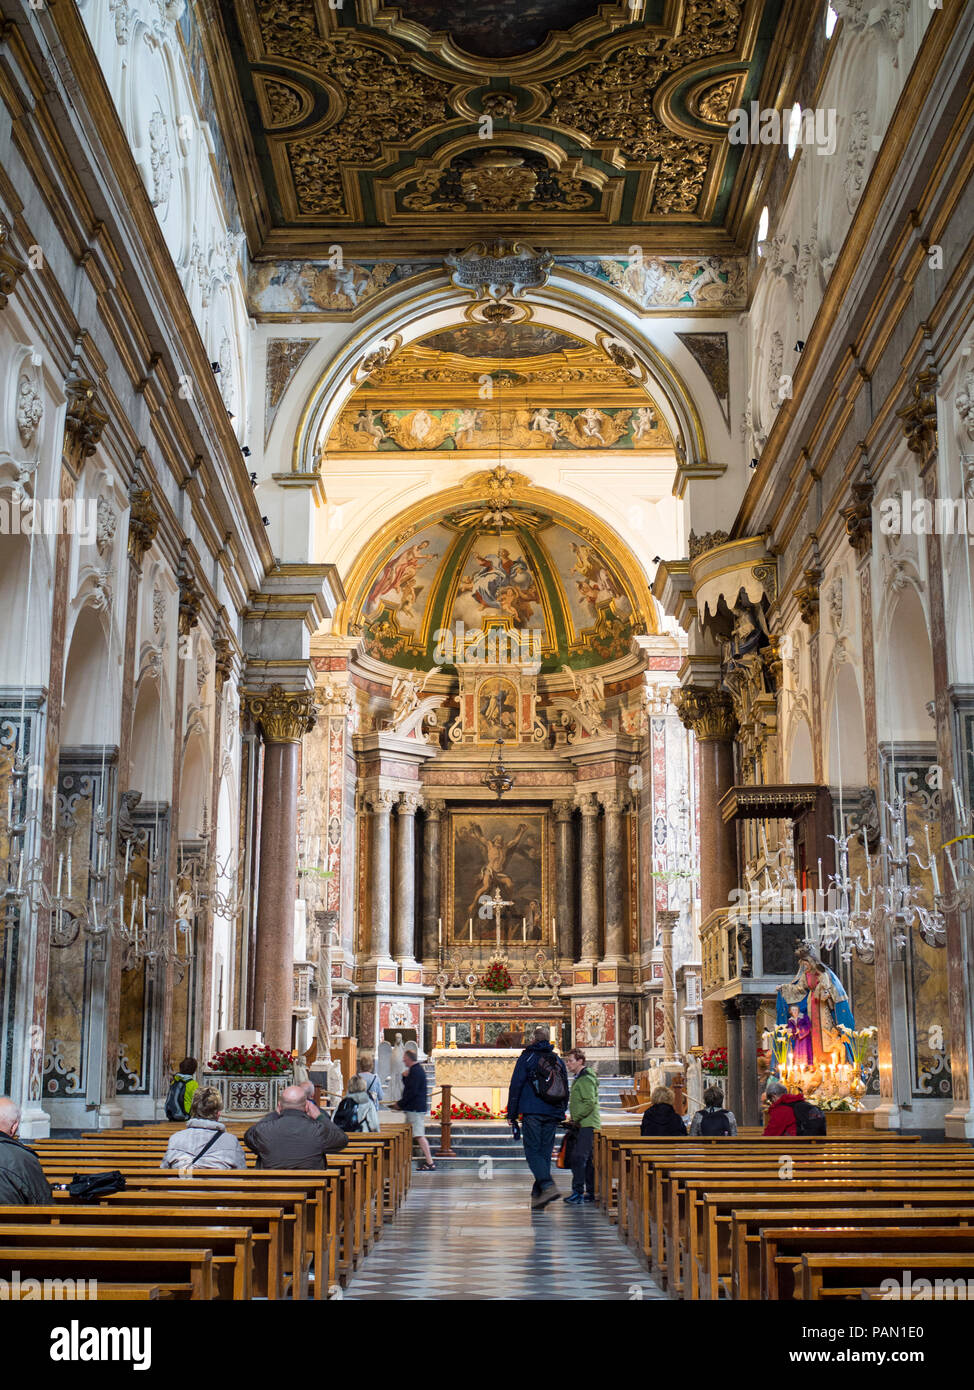 Inside the Amalfi Cathedral, a 9th-century Roman Catholic cathedral in the Piazza del Duomo, Amalfi, Italy. Stock Photo